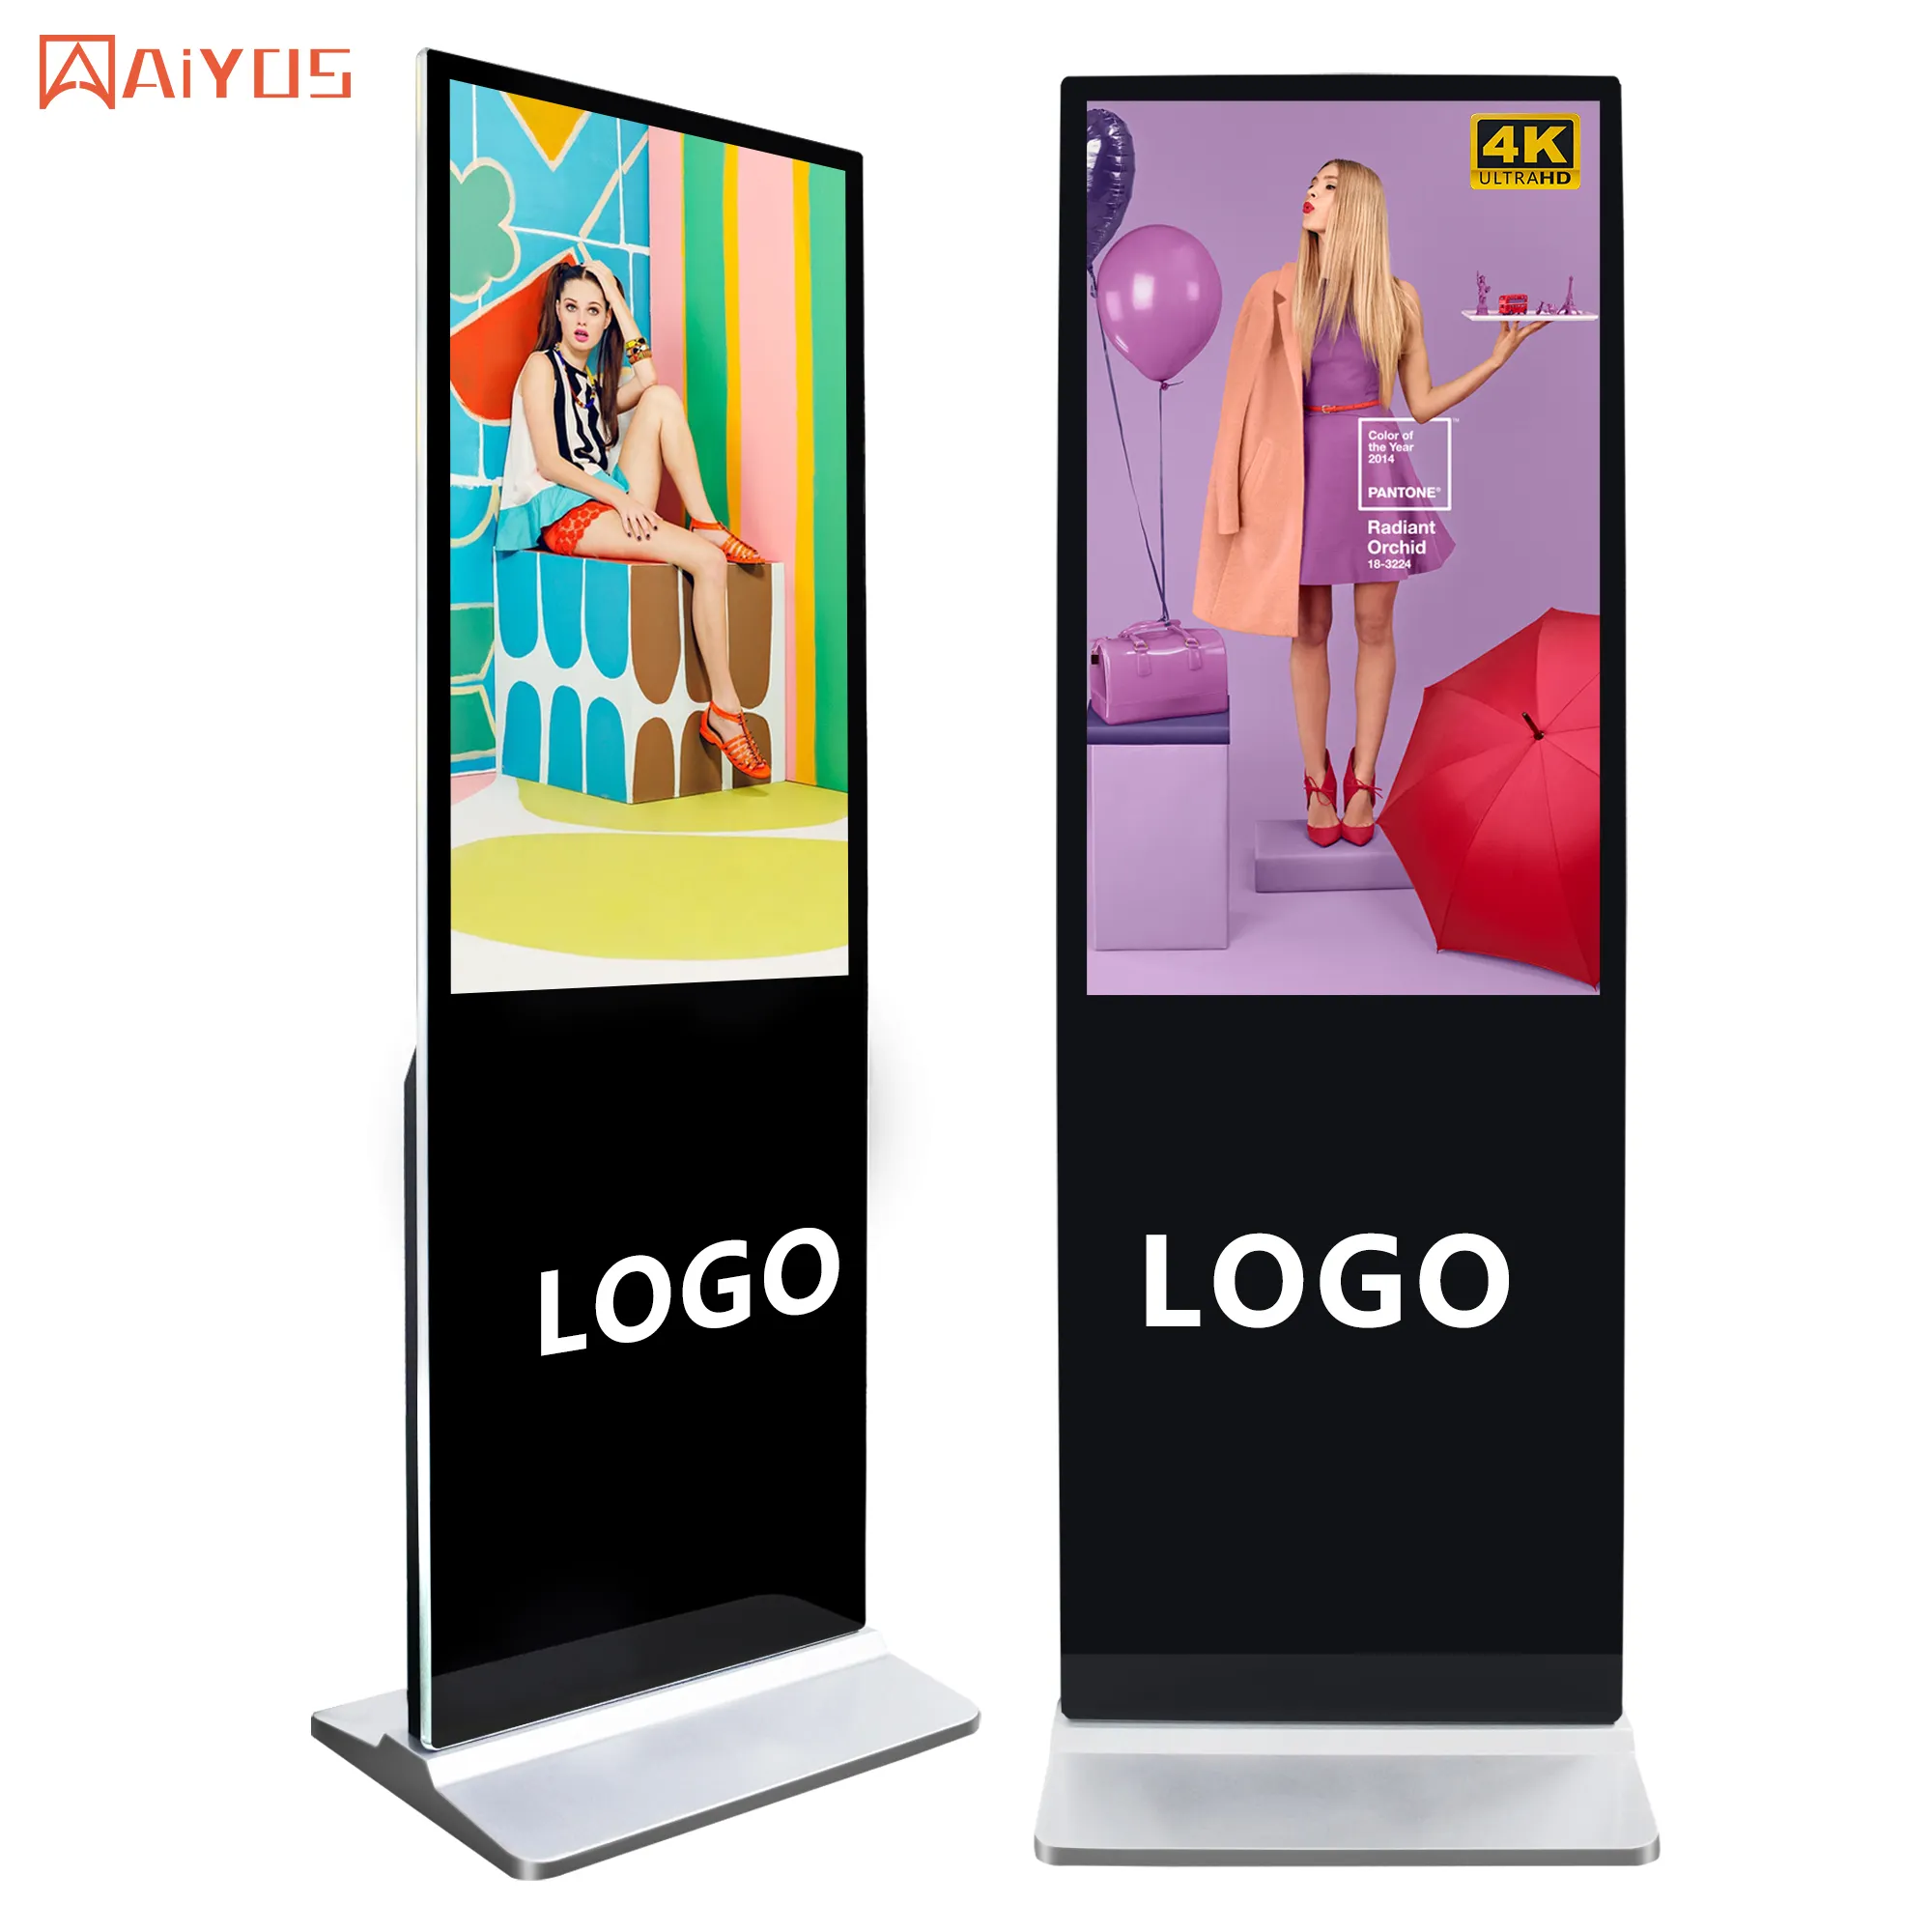 55 Inch Indoor Media Player Full HD Touch Screen Kiosk Video LCD Display For Airport Directional Information Digital Signage